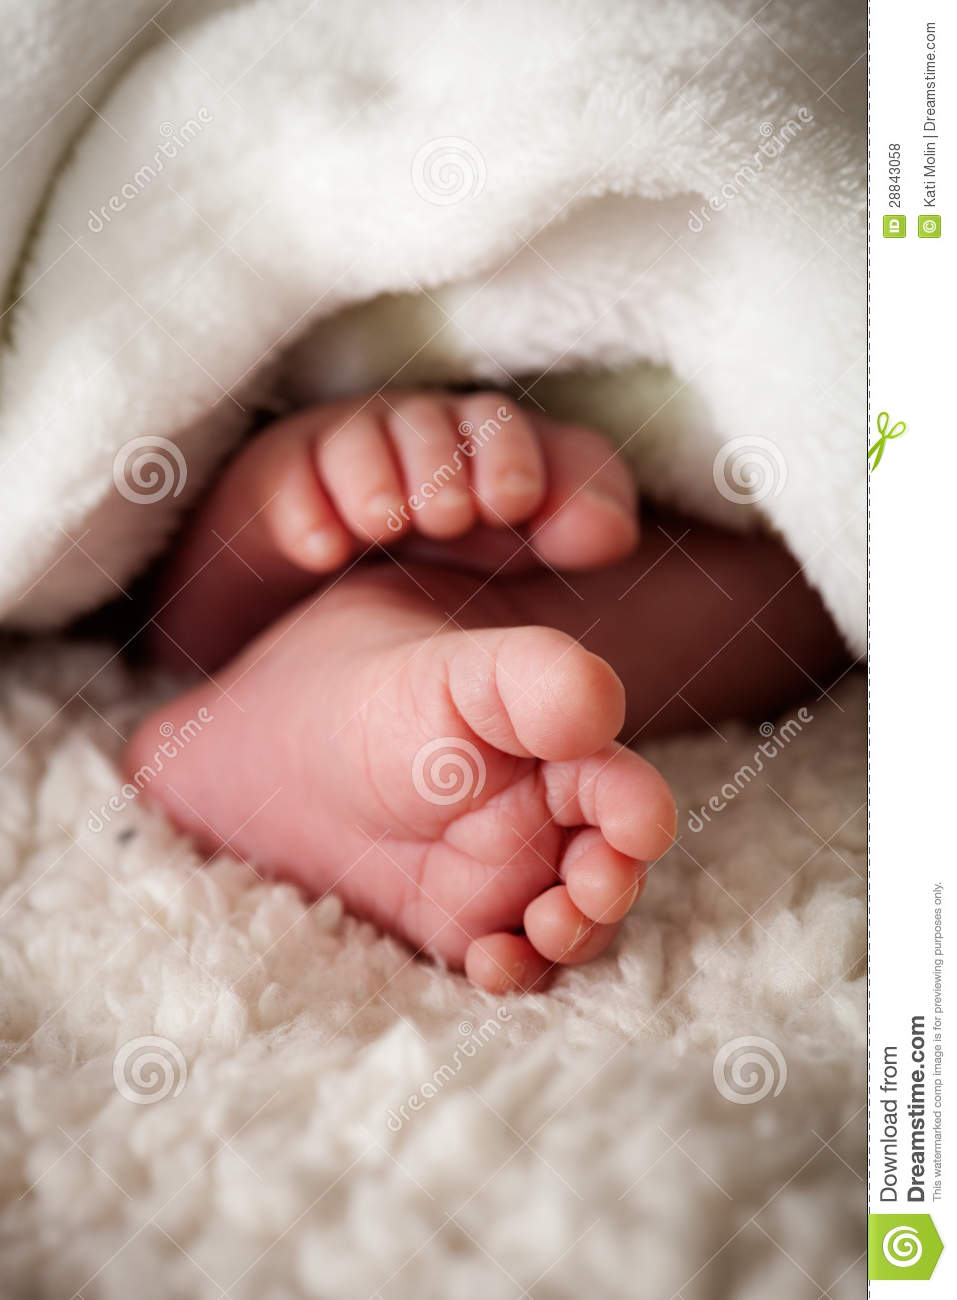 Baby Toes Royalty Free Stock Photos   Image  28843058